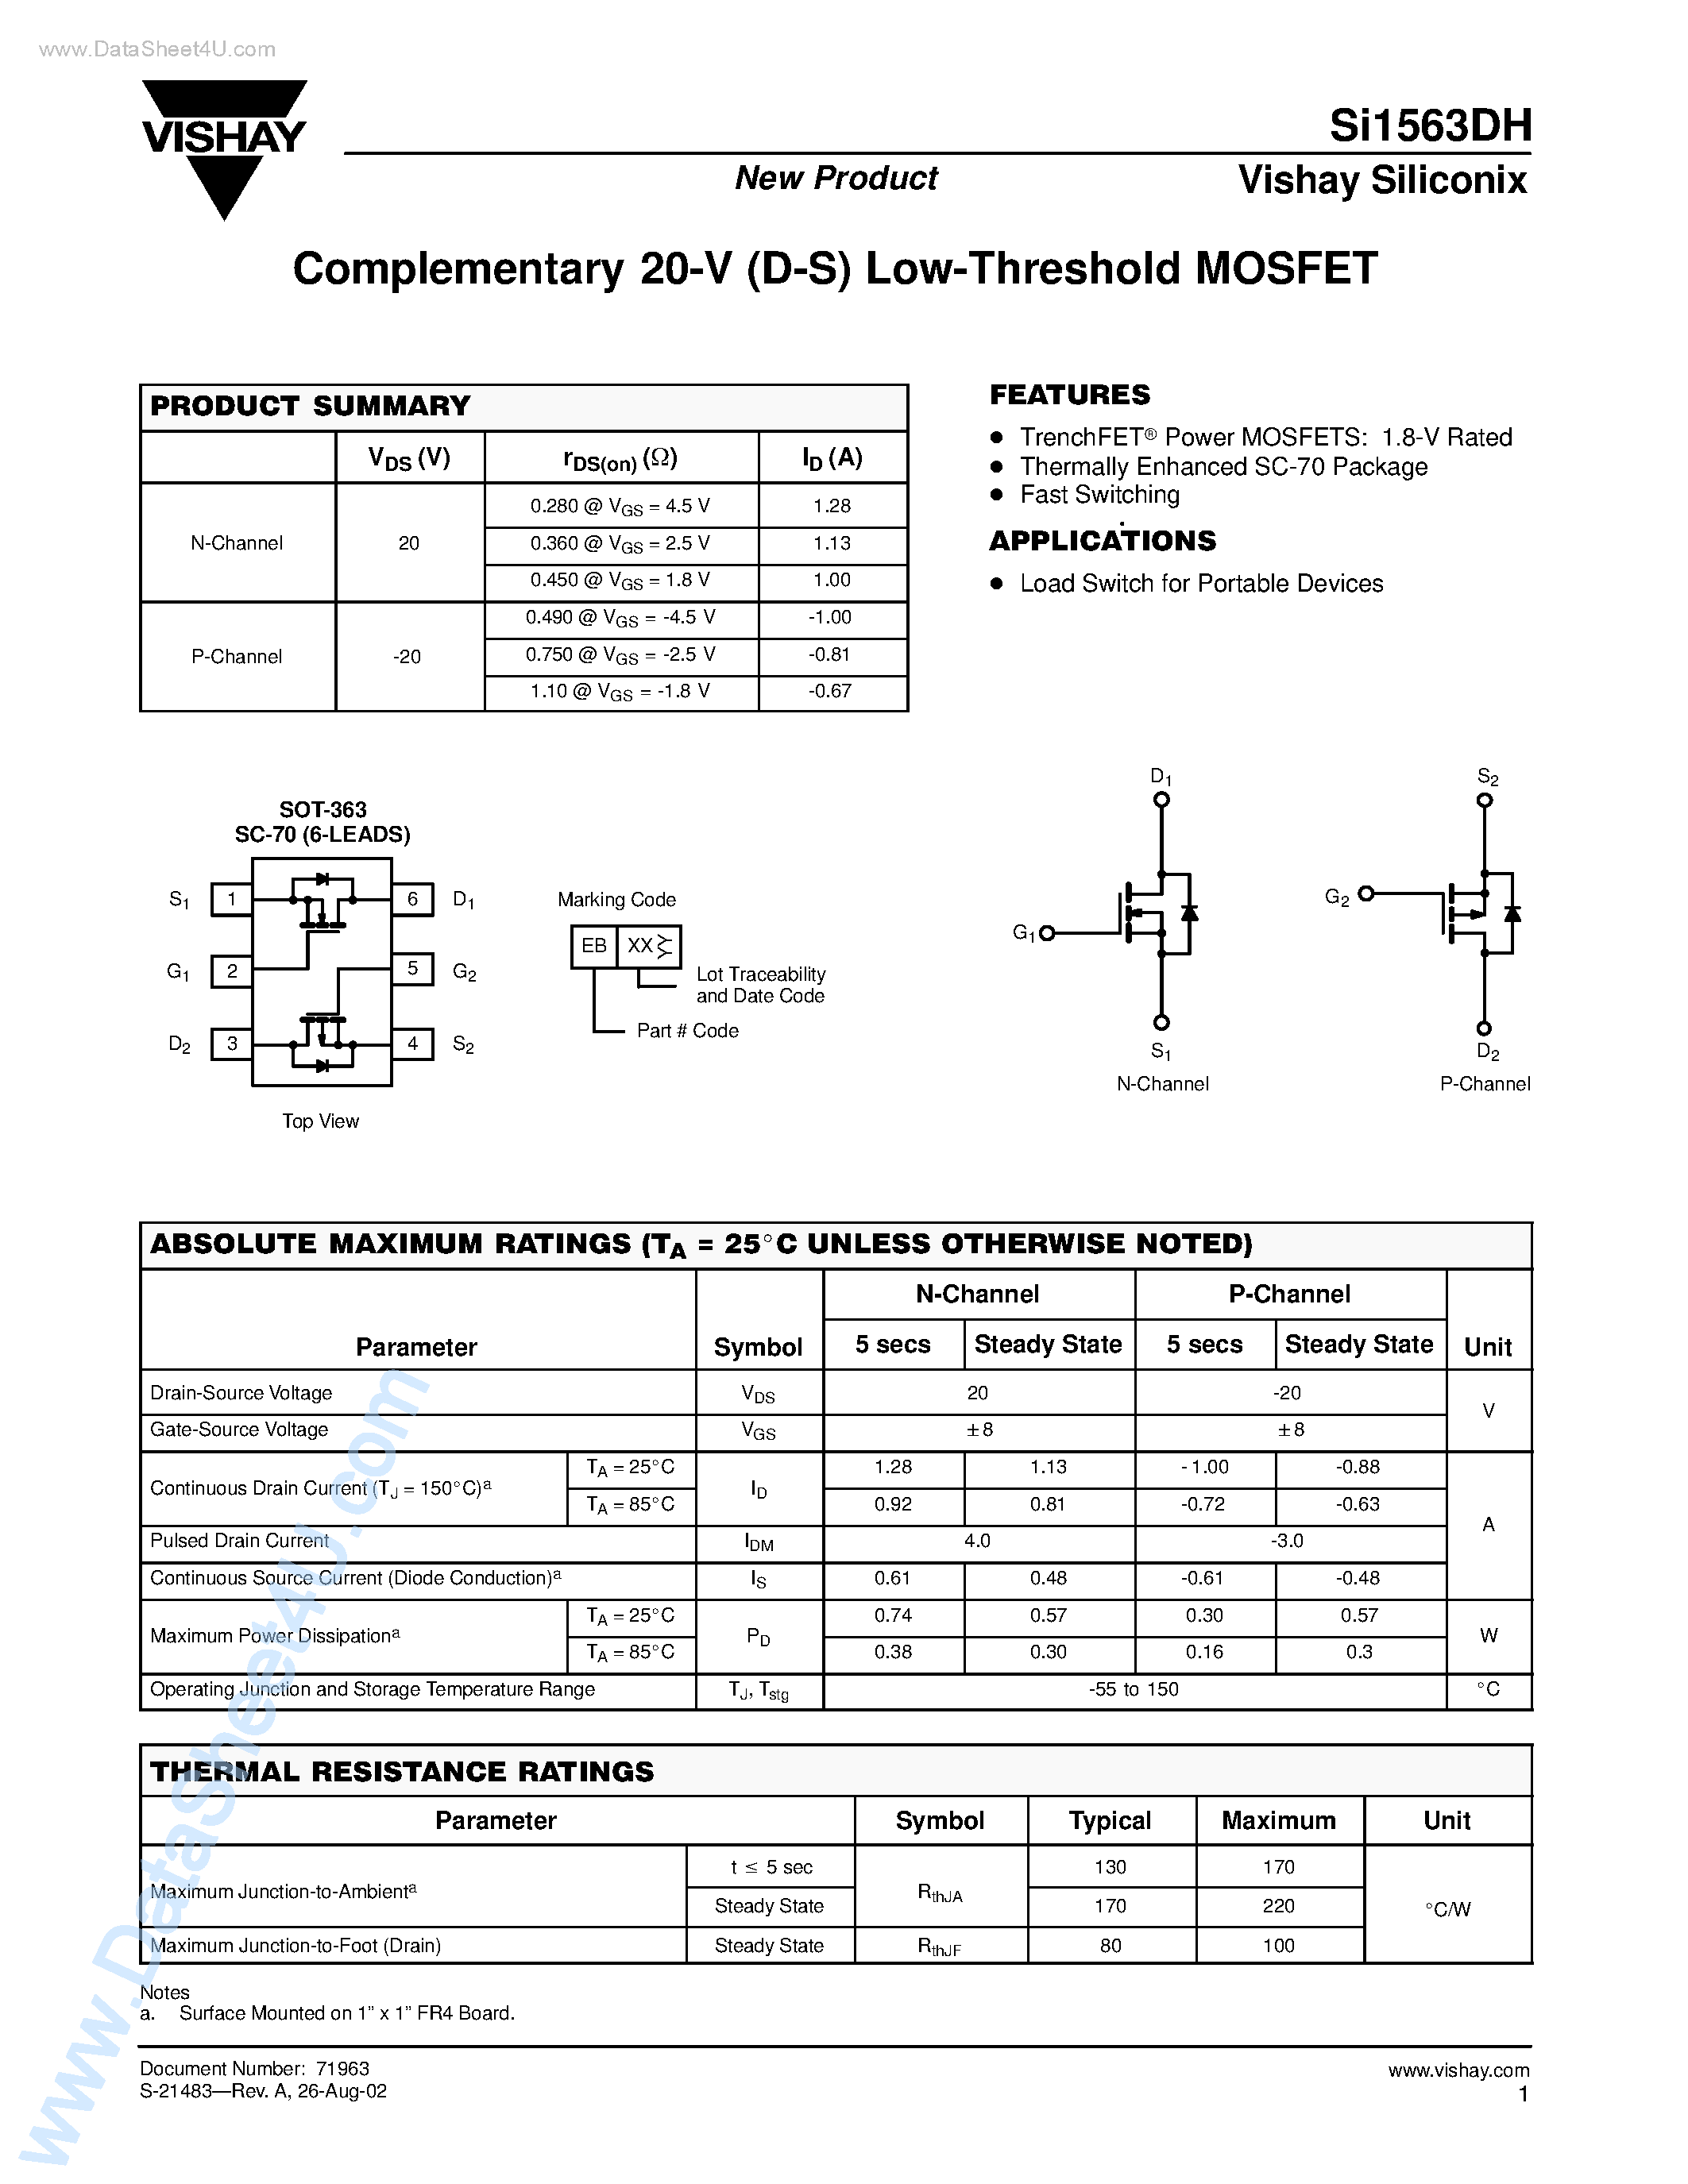 Даташит SI1563DH - Complementary 20-V (D-S) Low-Threshold MOSFET страница 1